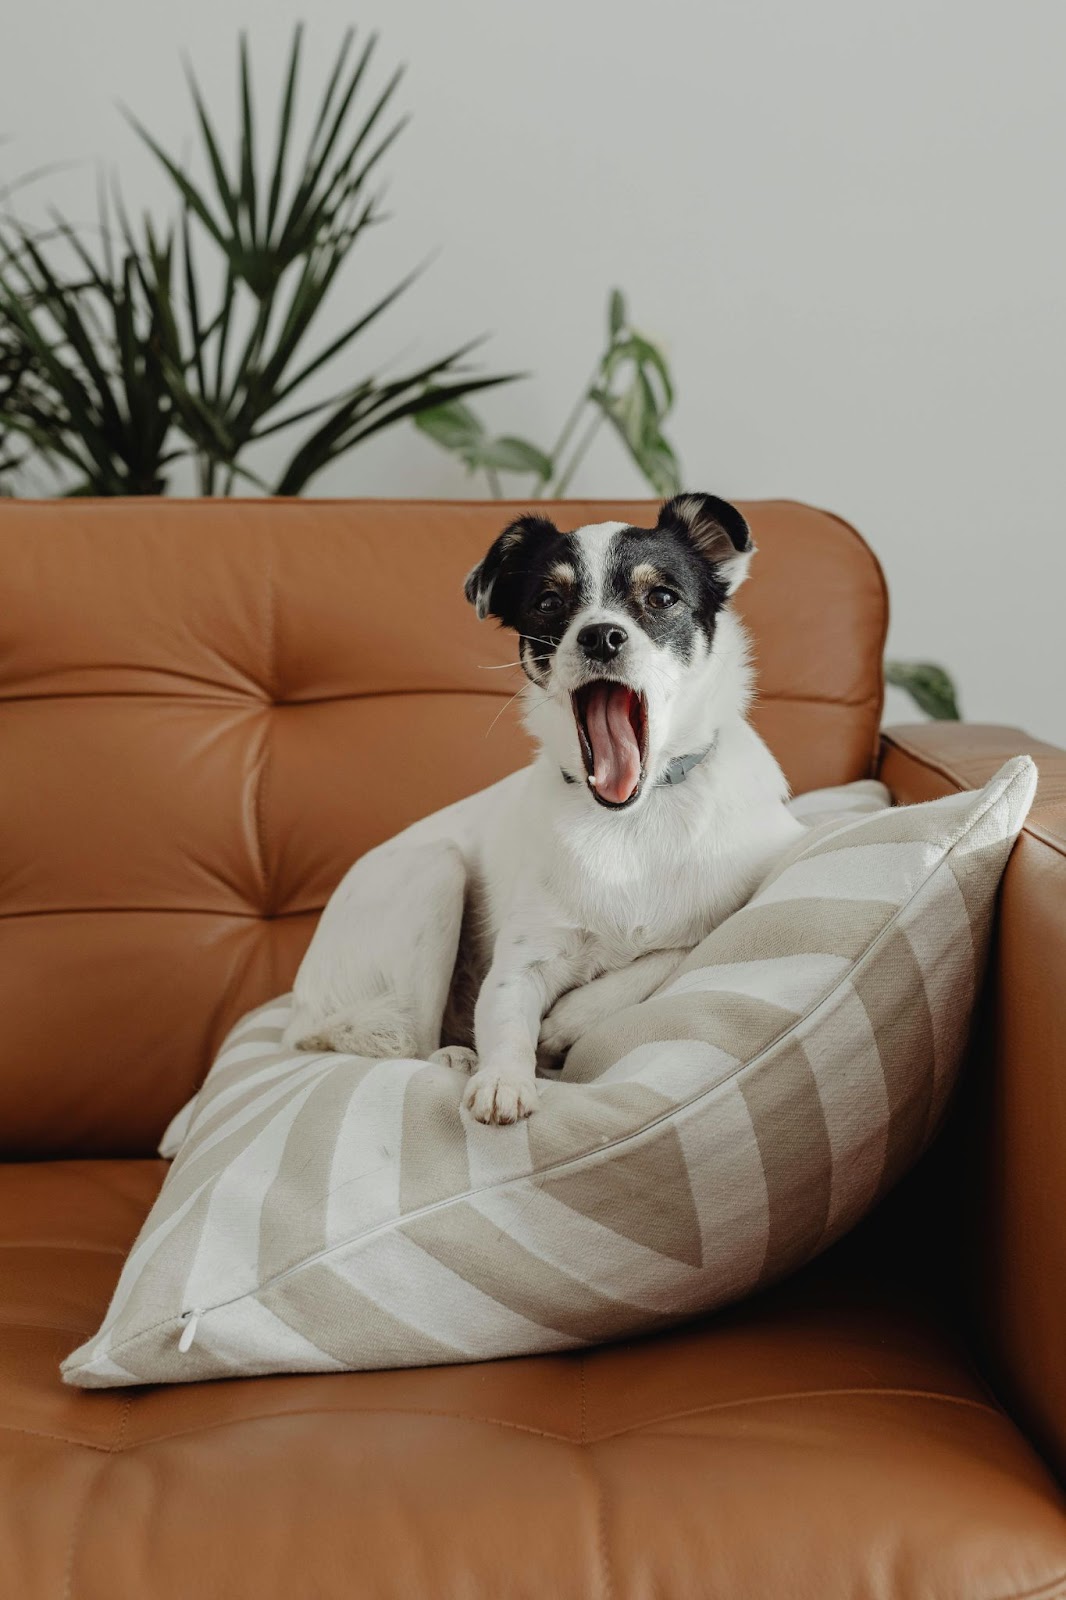 Dealing with Dog Barking, Jumping, and Chewing